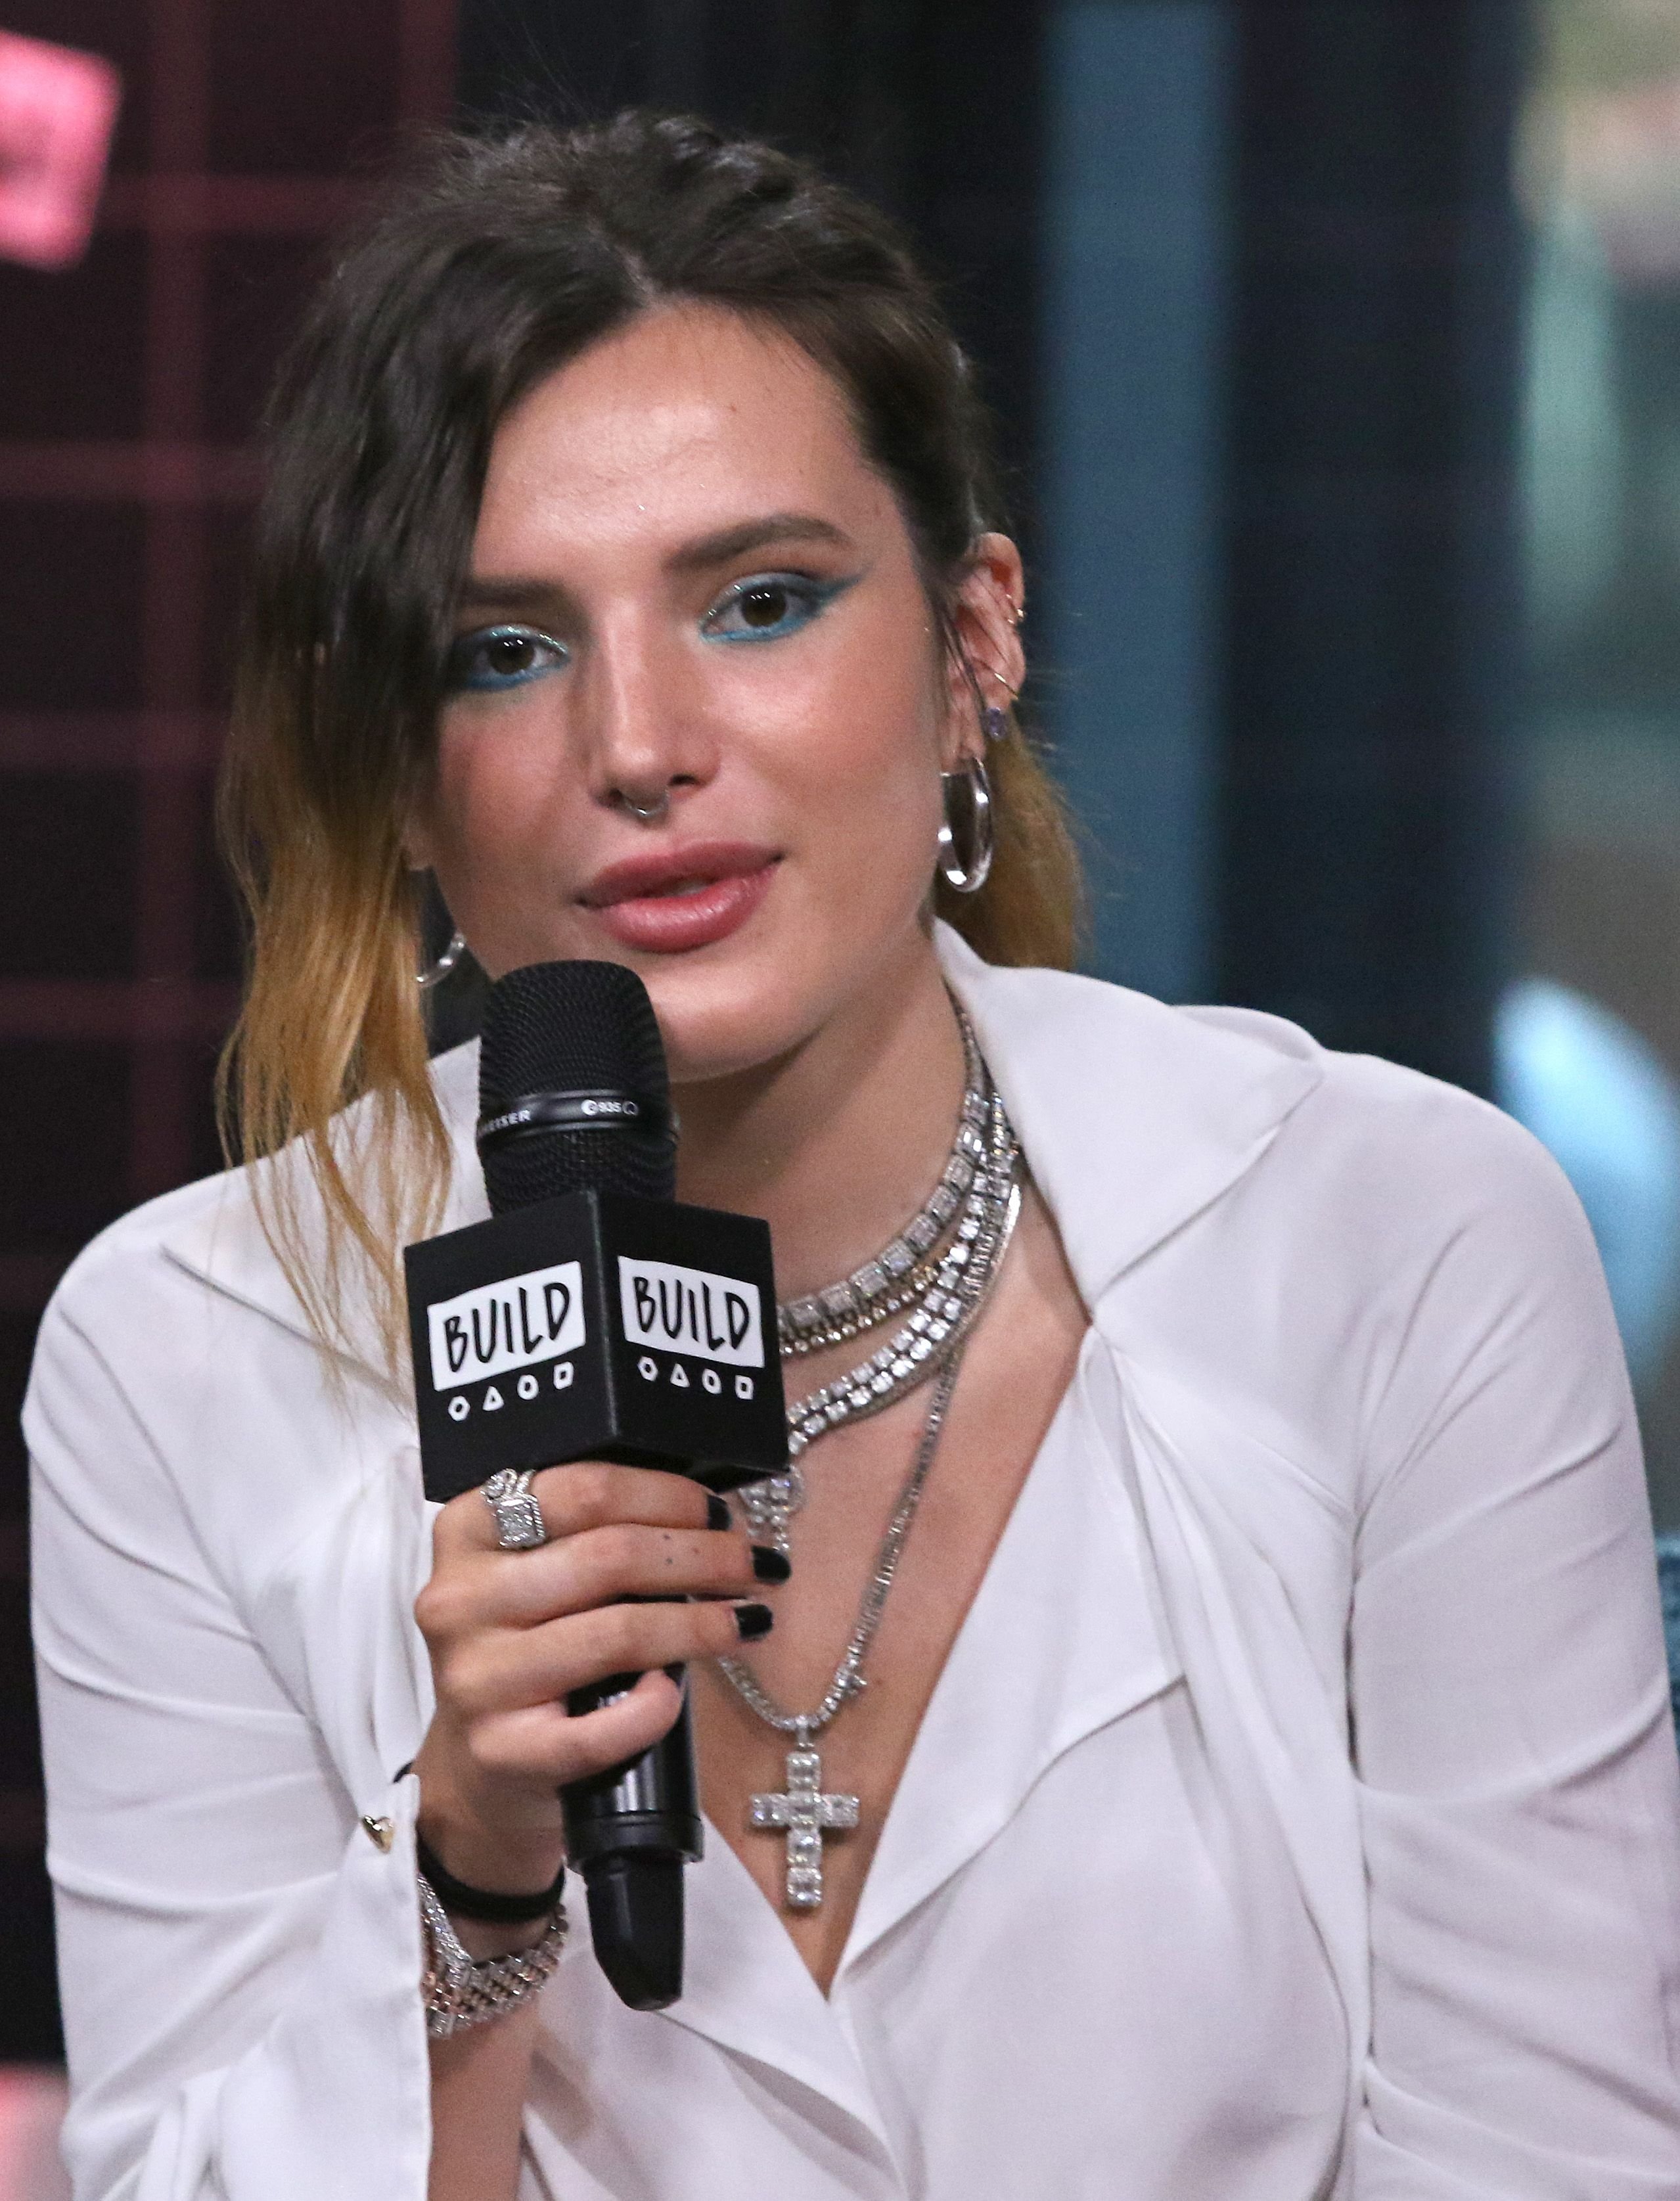  Bella Thorne discusses "The Life of a Wannabe Mogul: A Mental Disarray" at Build Studio in June 2019 in New York City | Source: Getty Images